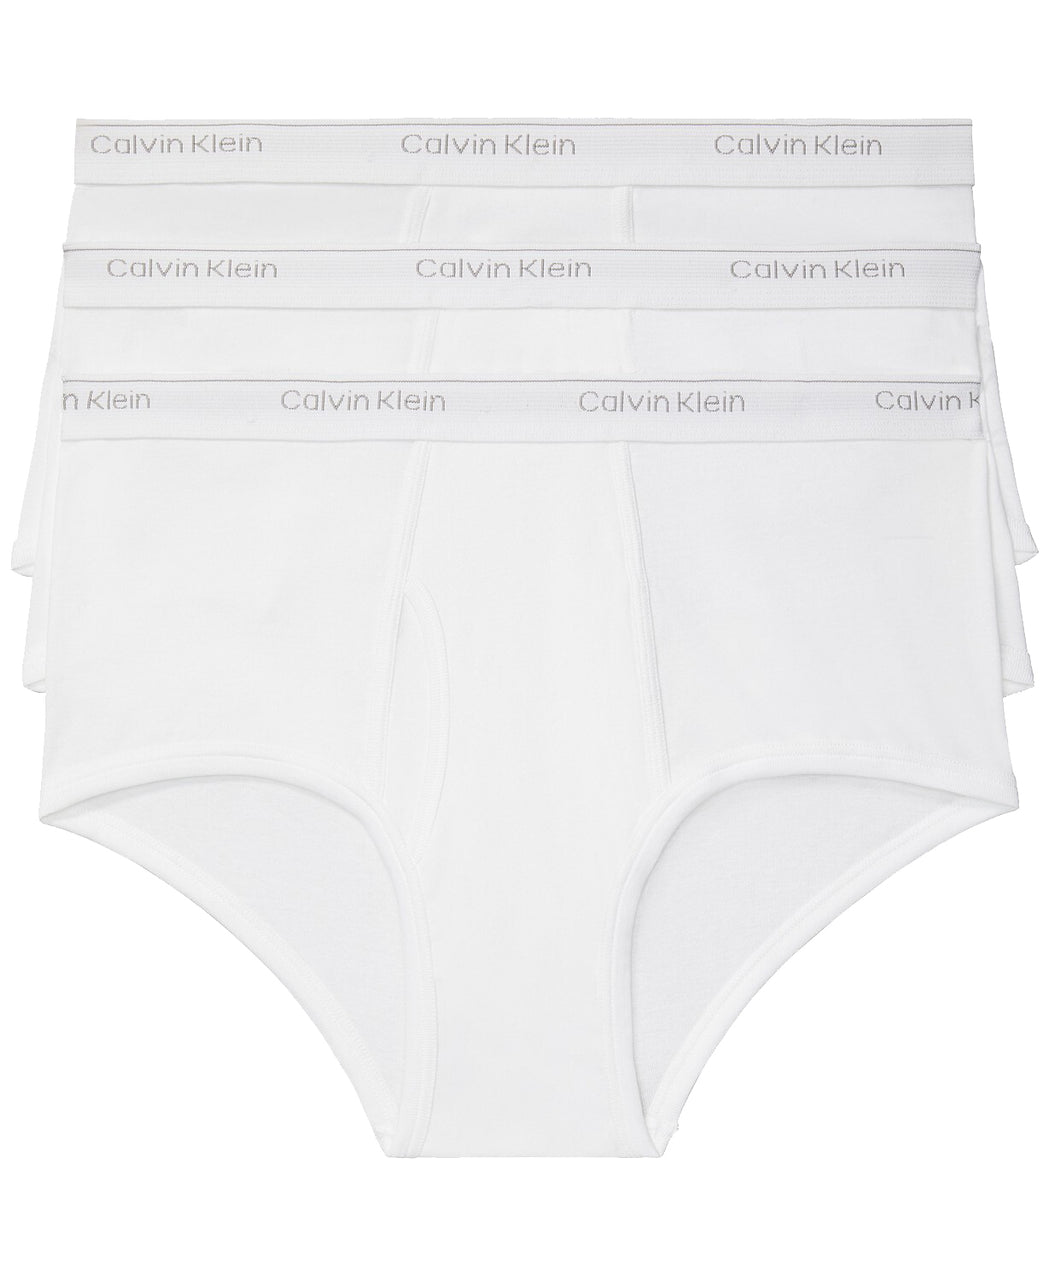 Calvin Klein Men\'s Big – Tall Classics Underwear Cotton Wanted Briefs and Pack 3